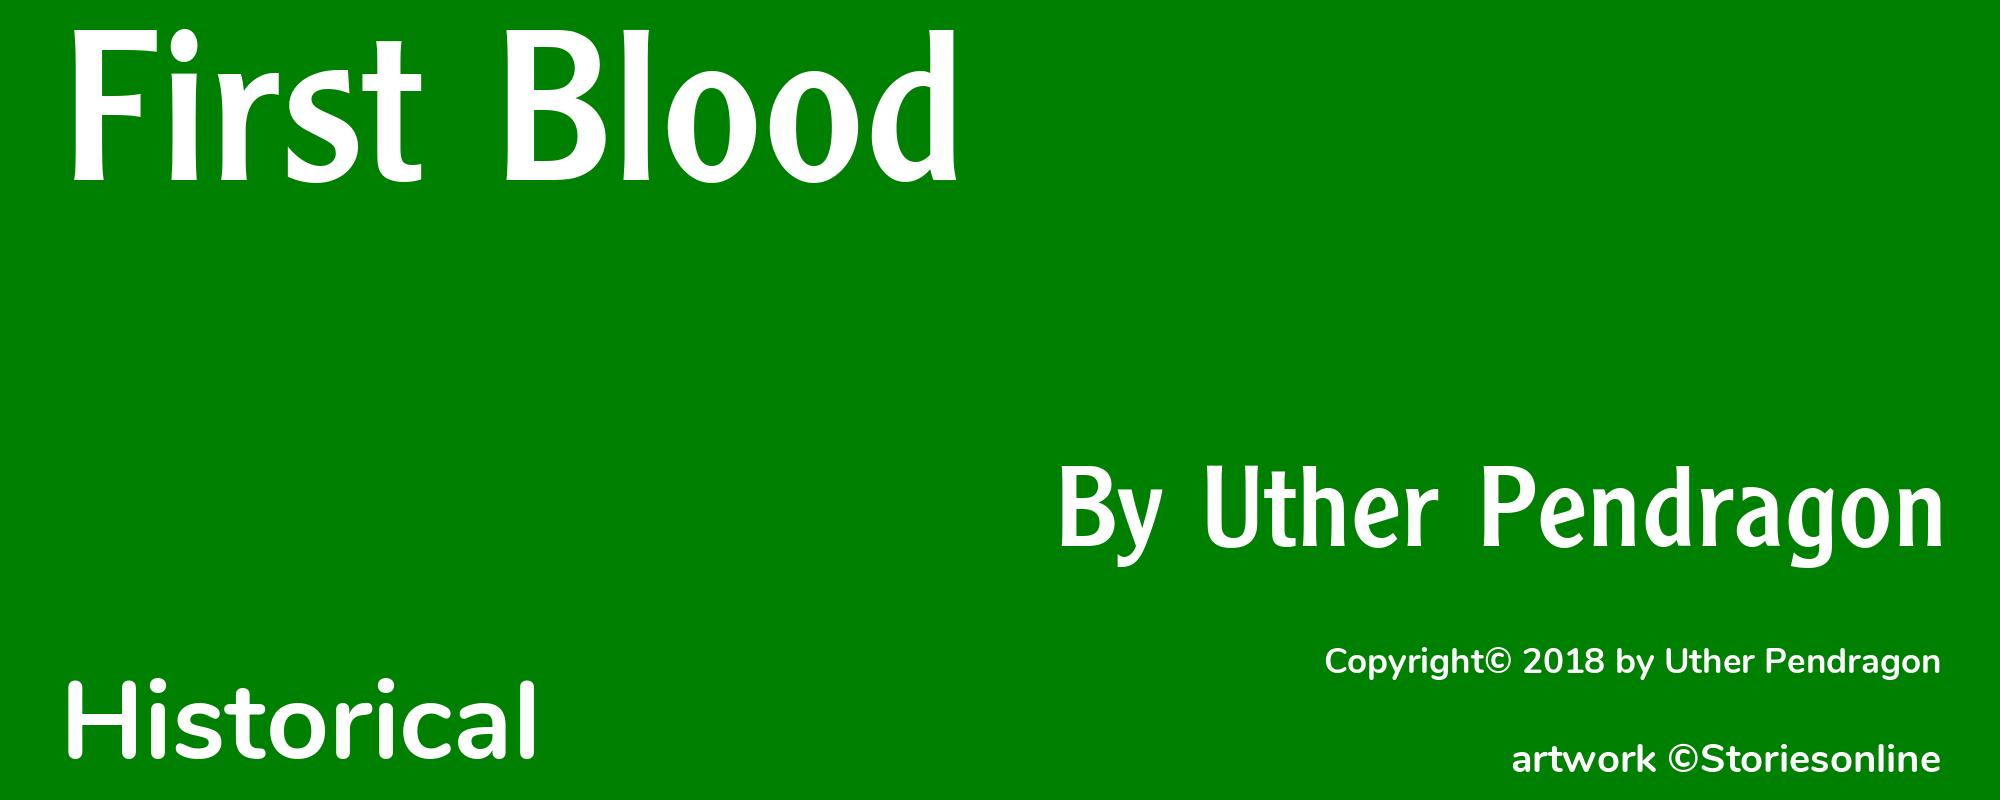 First Blood - Cover